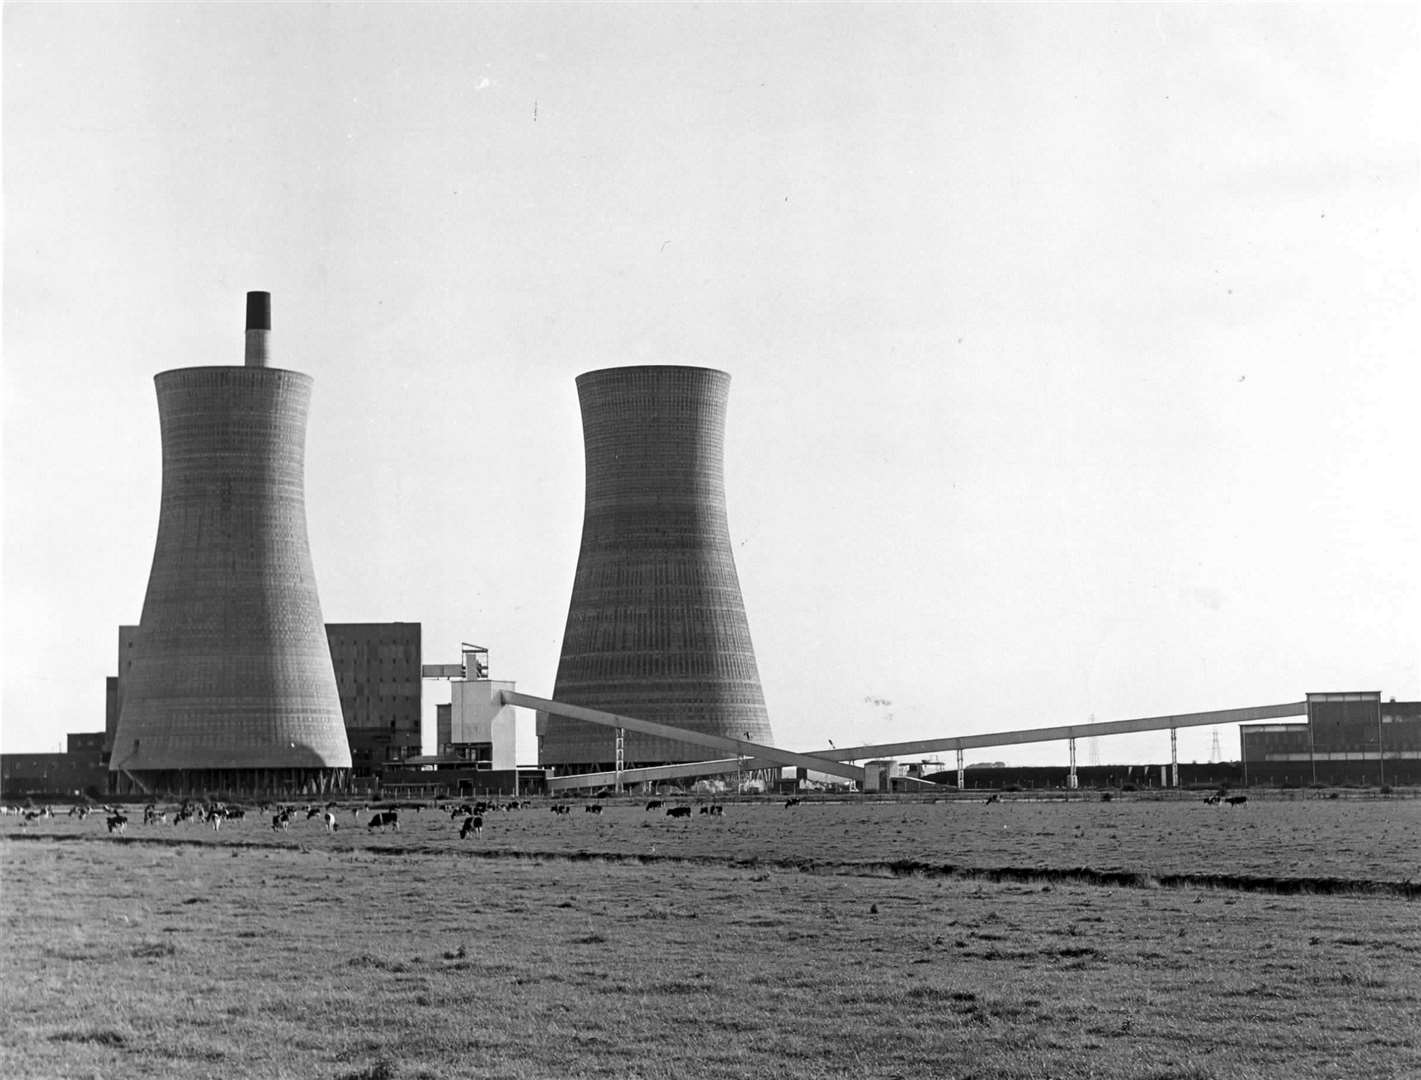 Animals grazing in front of the power station. Date unknown